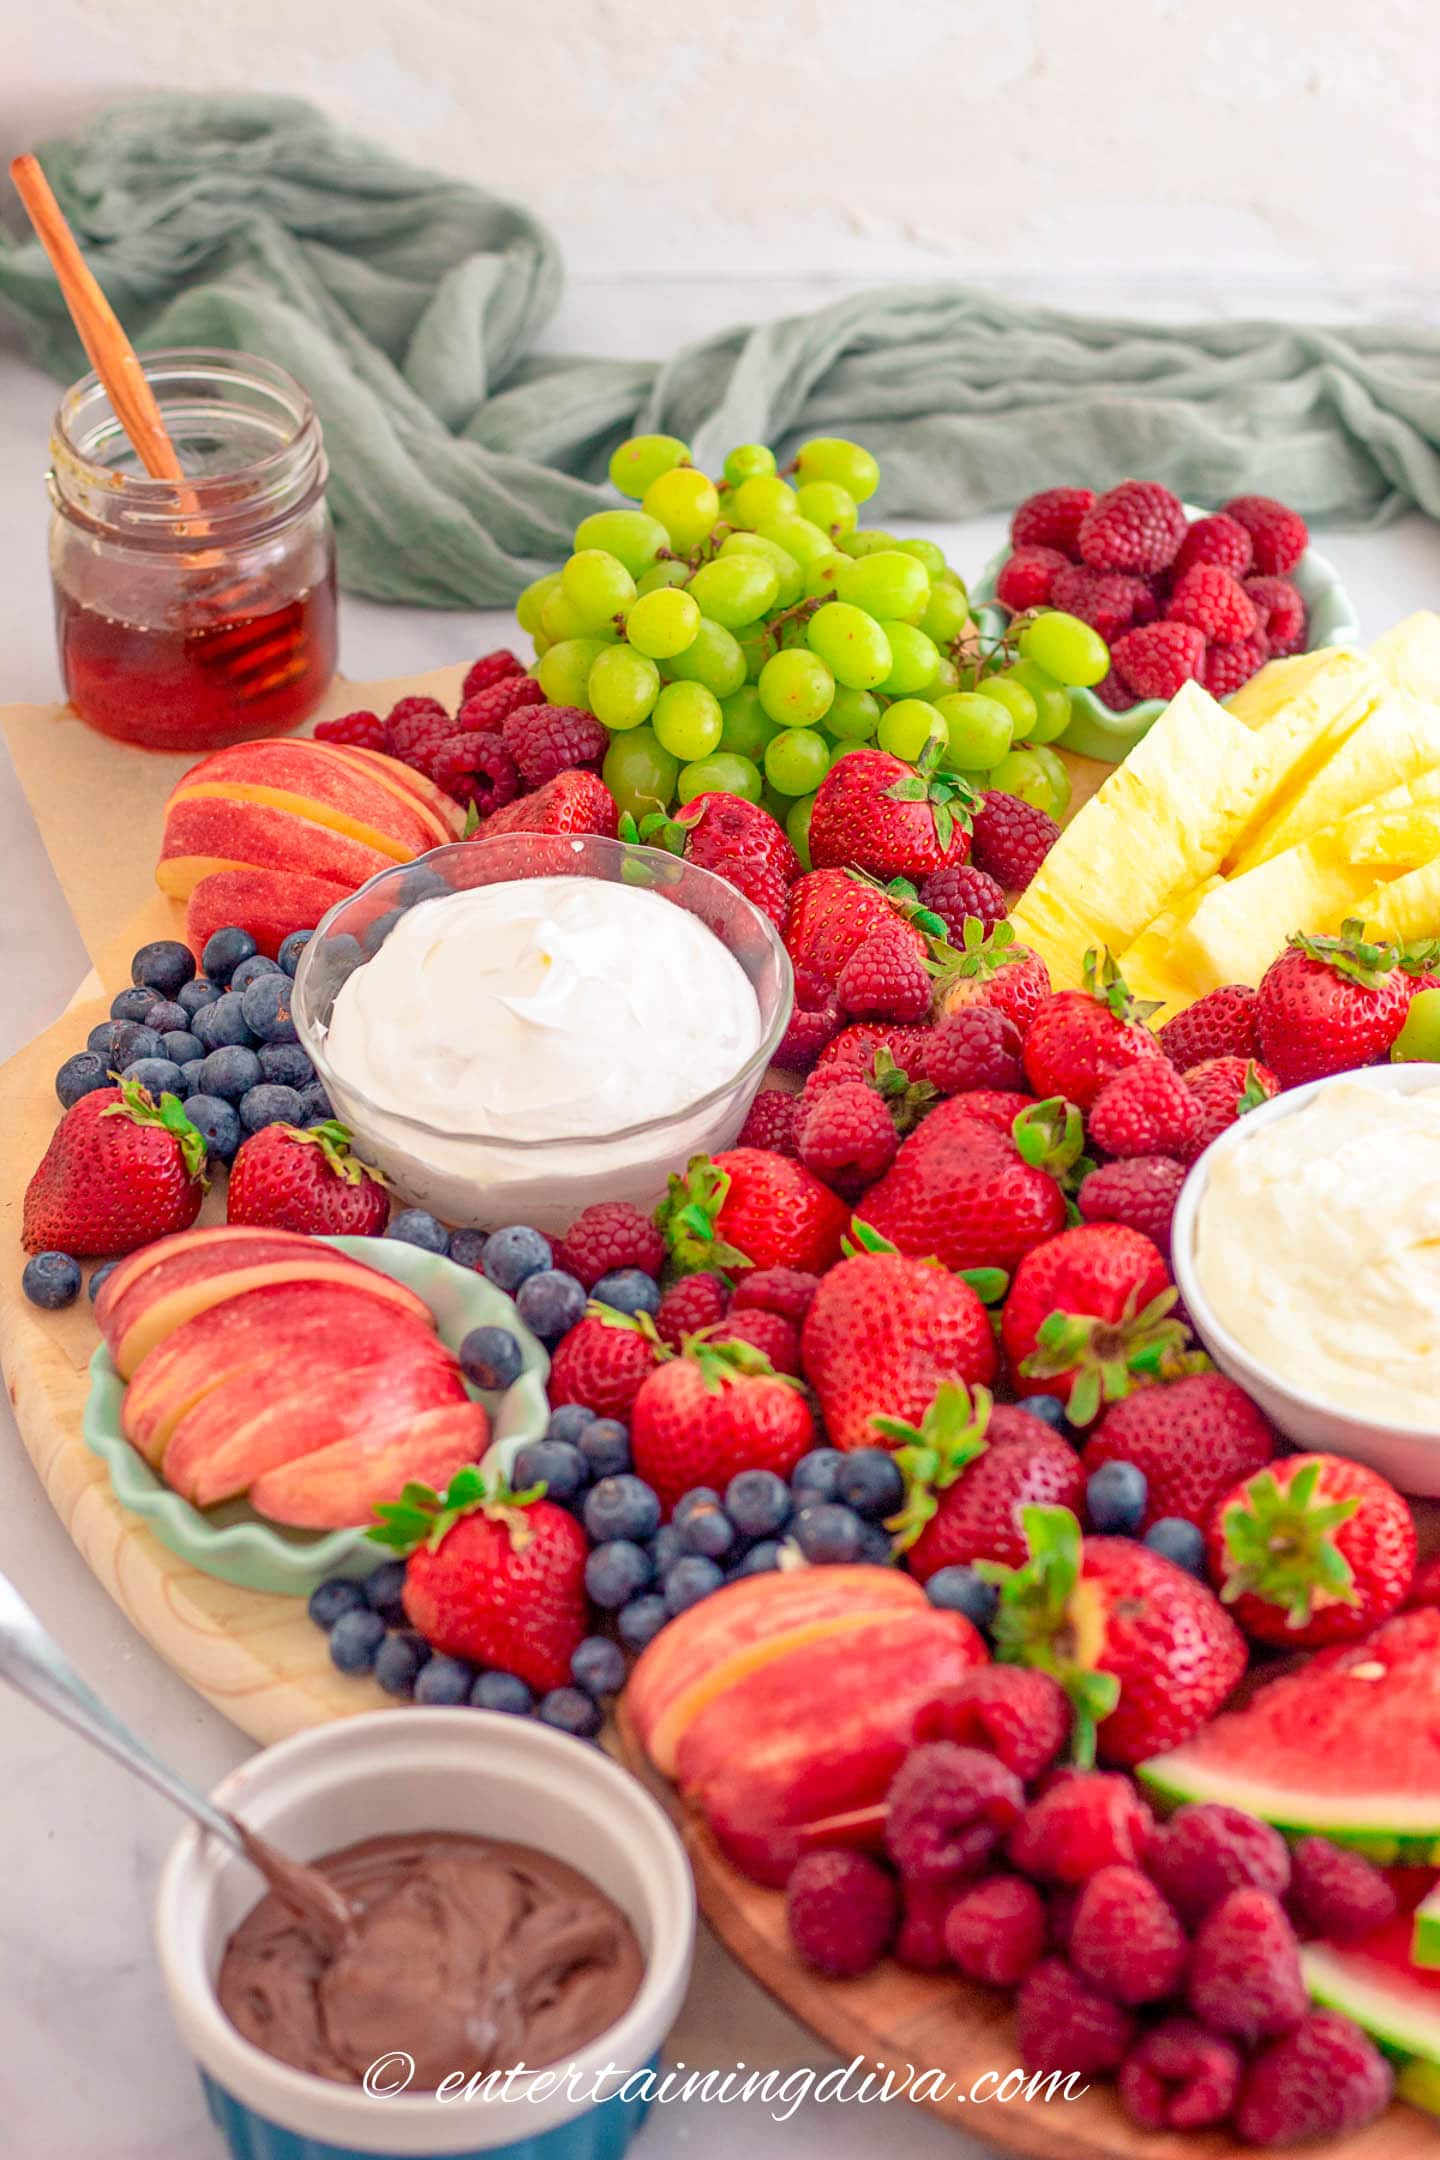 angled view of a fresh fruit charcuterie board with strawberries, blueberries, raspberries, grapes, apples, pineapple, watermelon and various dips